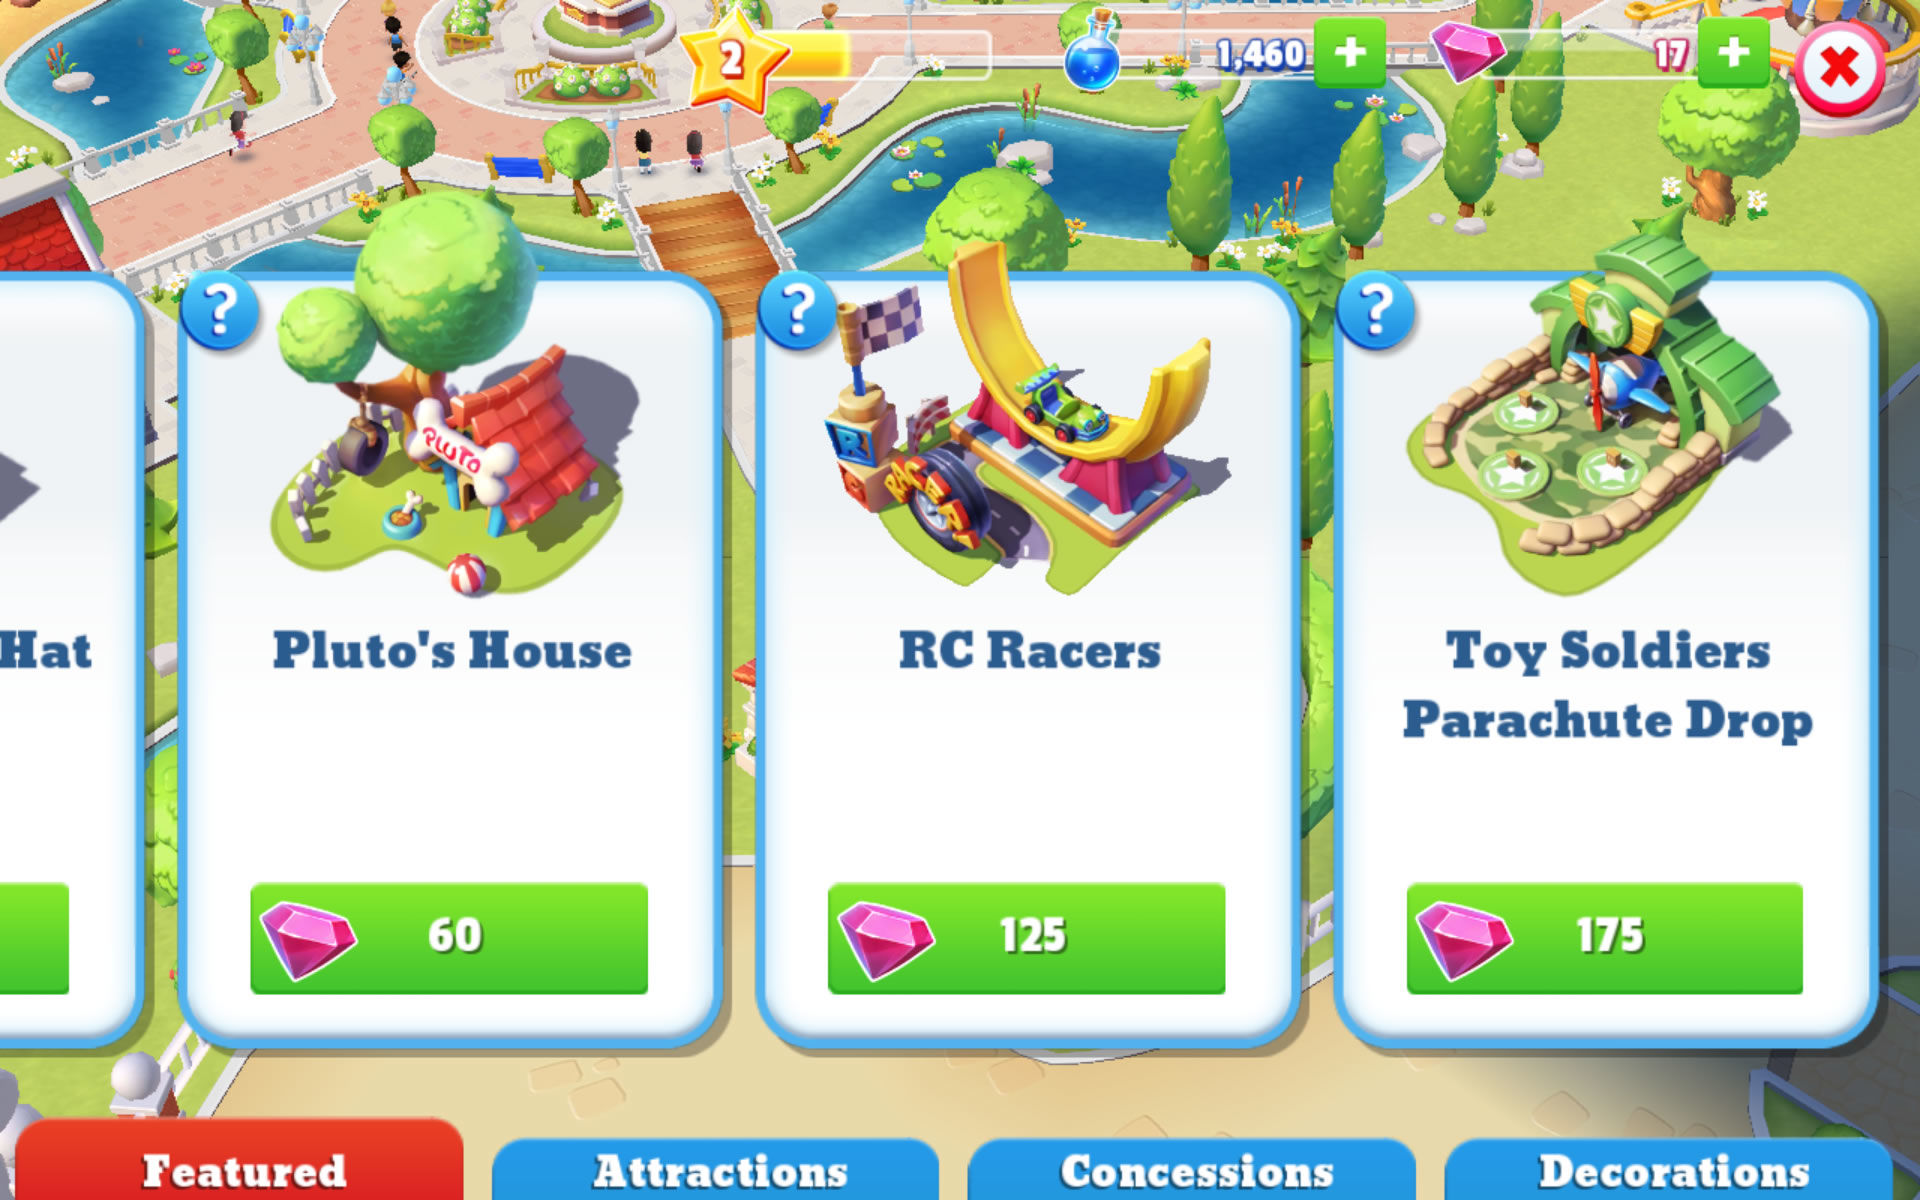 Attractions presented in the game